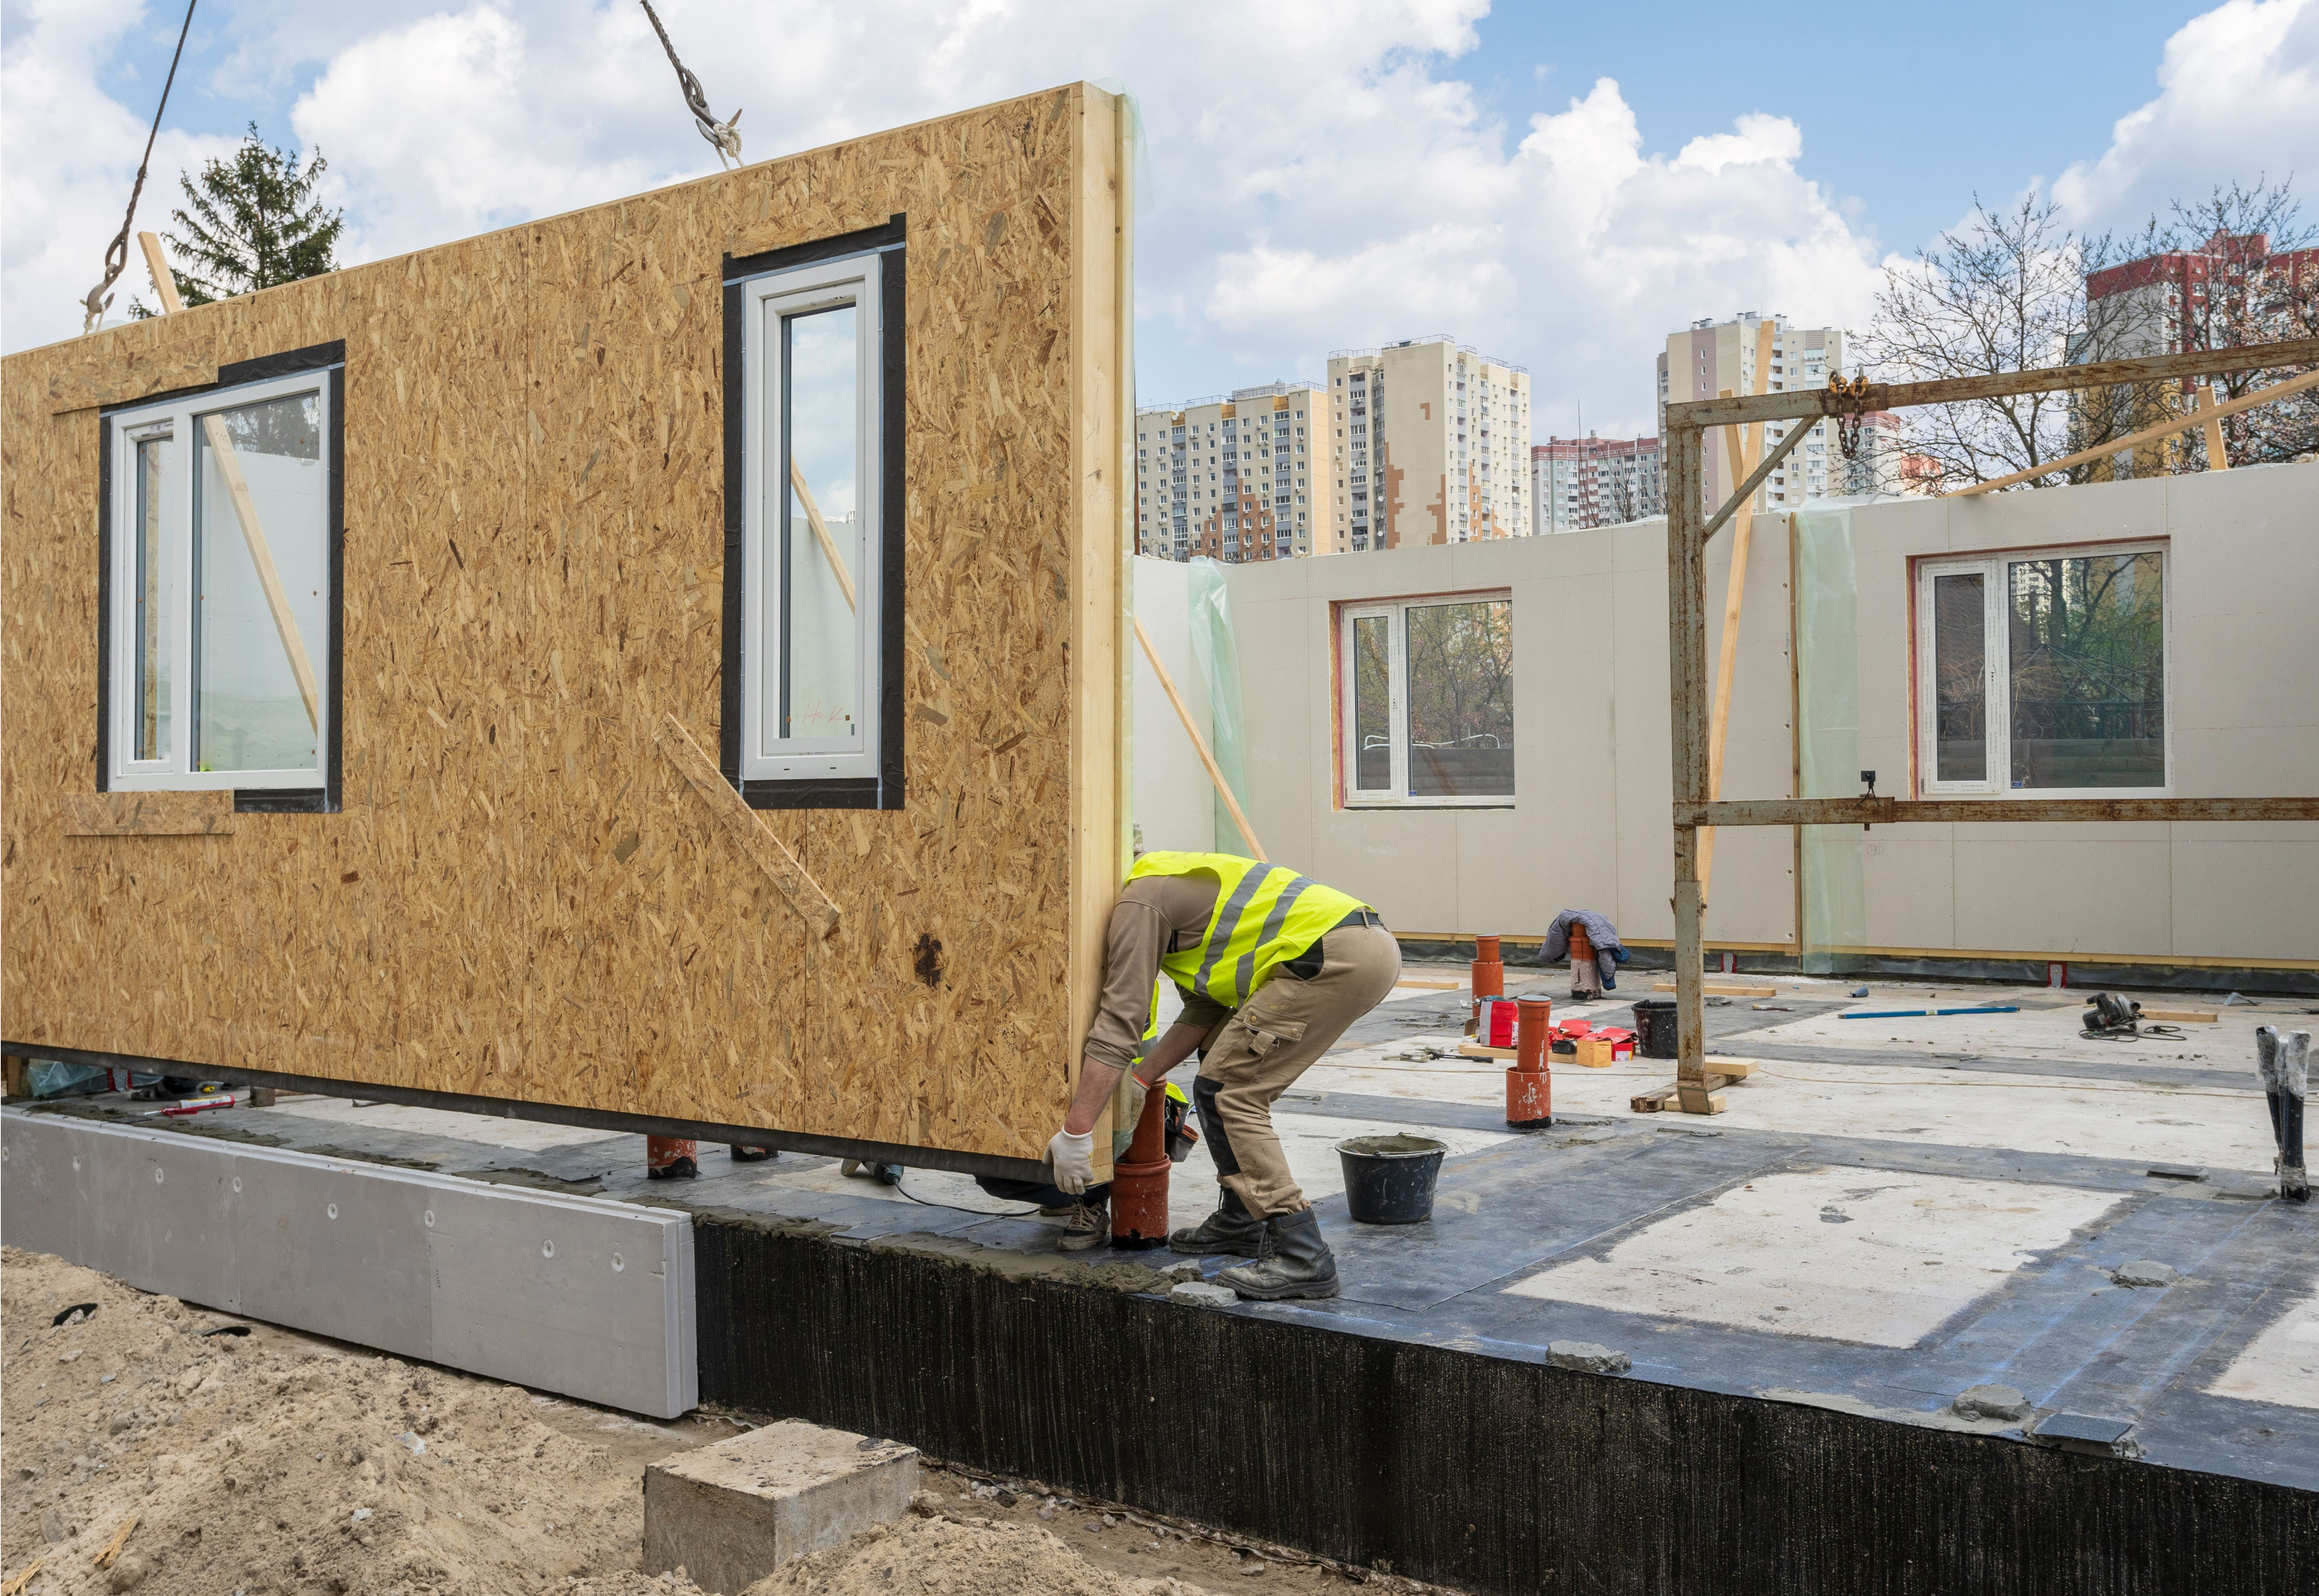 Modular Construction Using Plywood as Sustainable Alternative to Traditional Construction